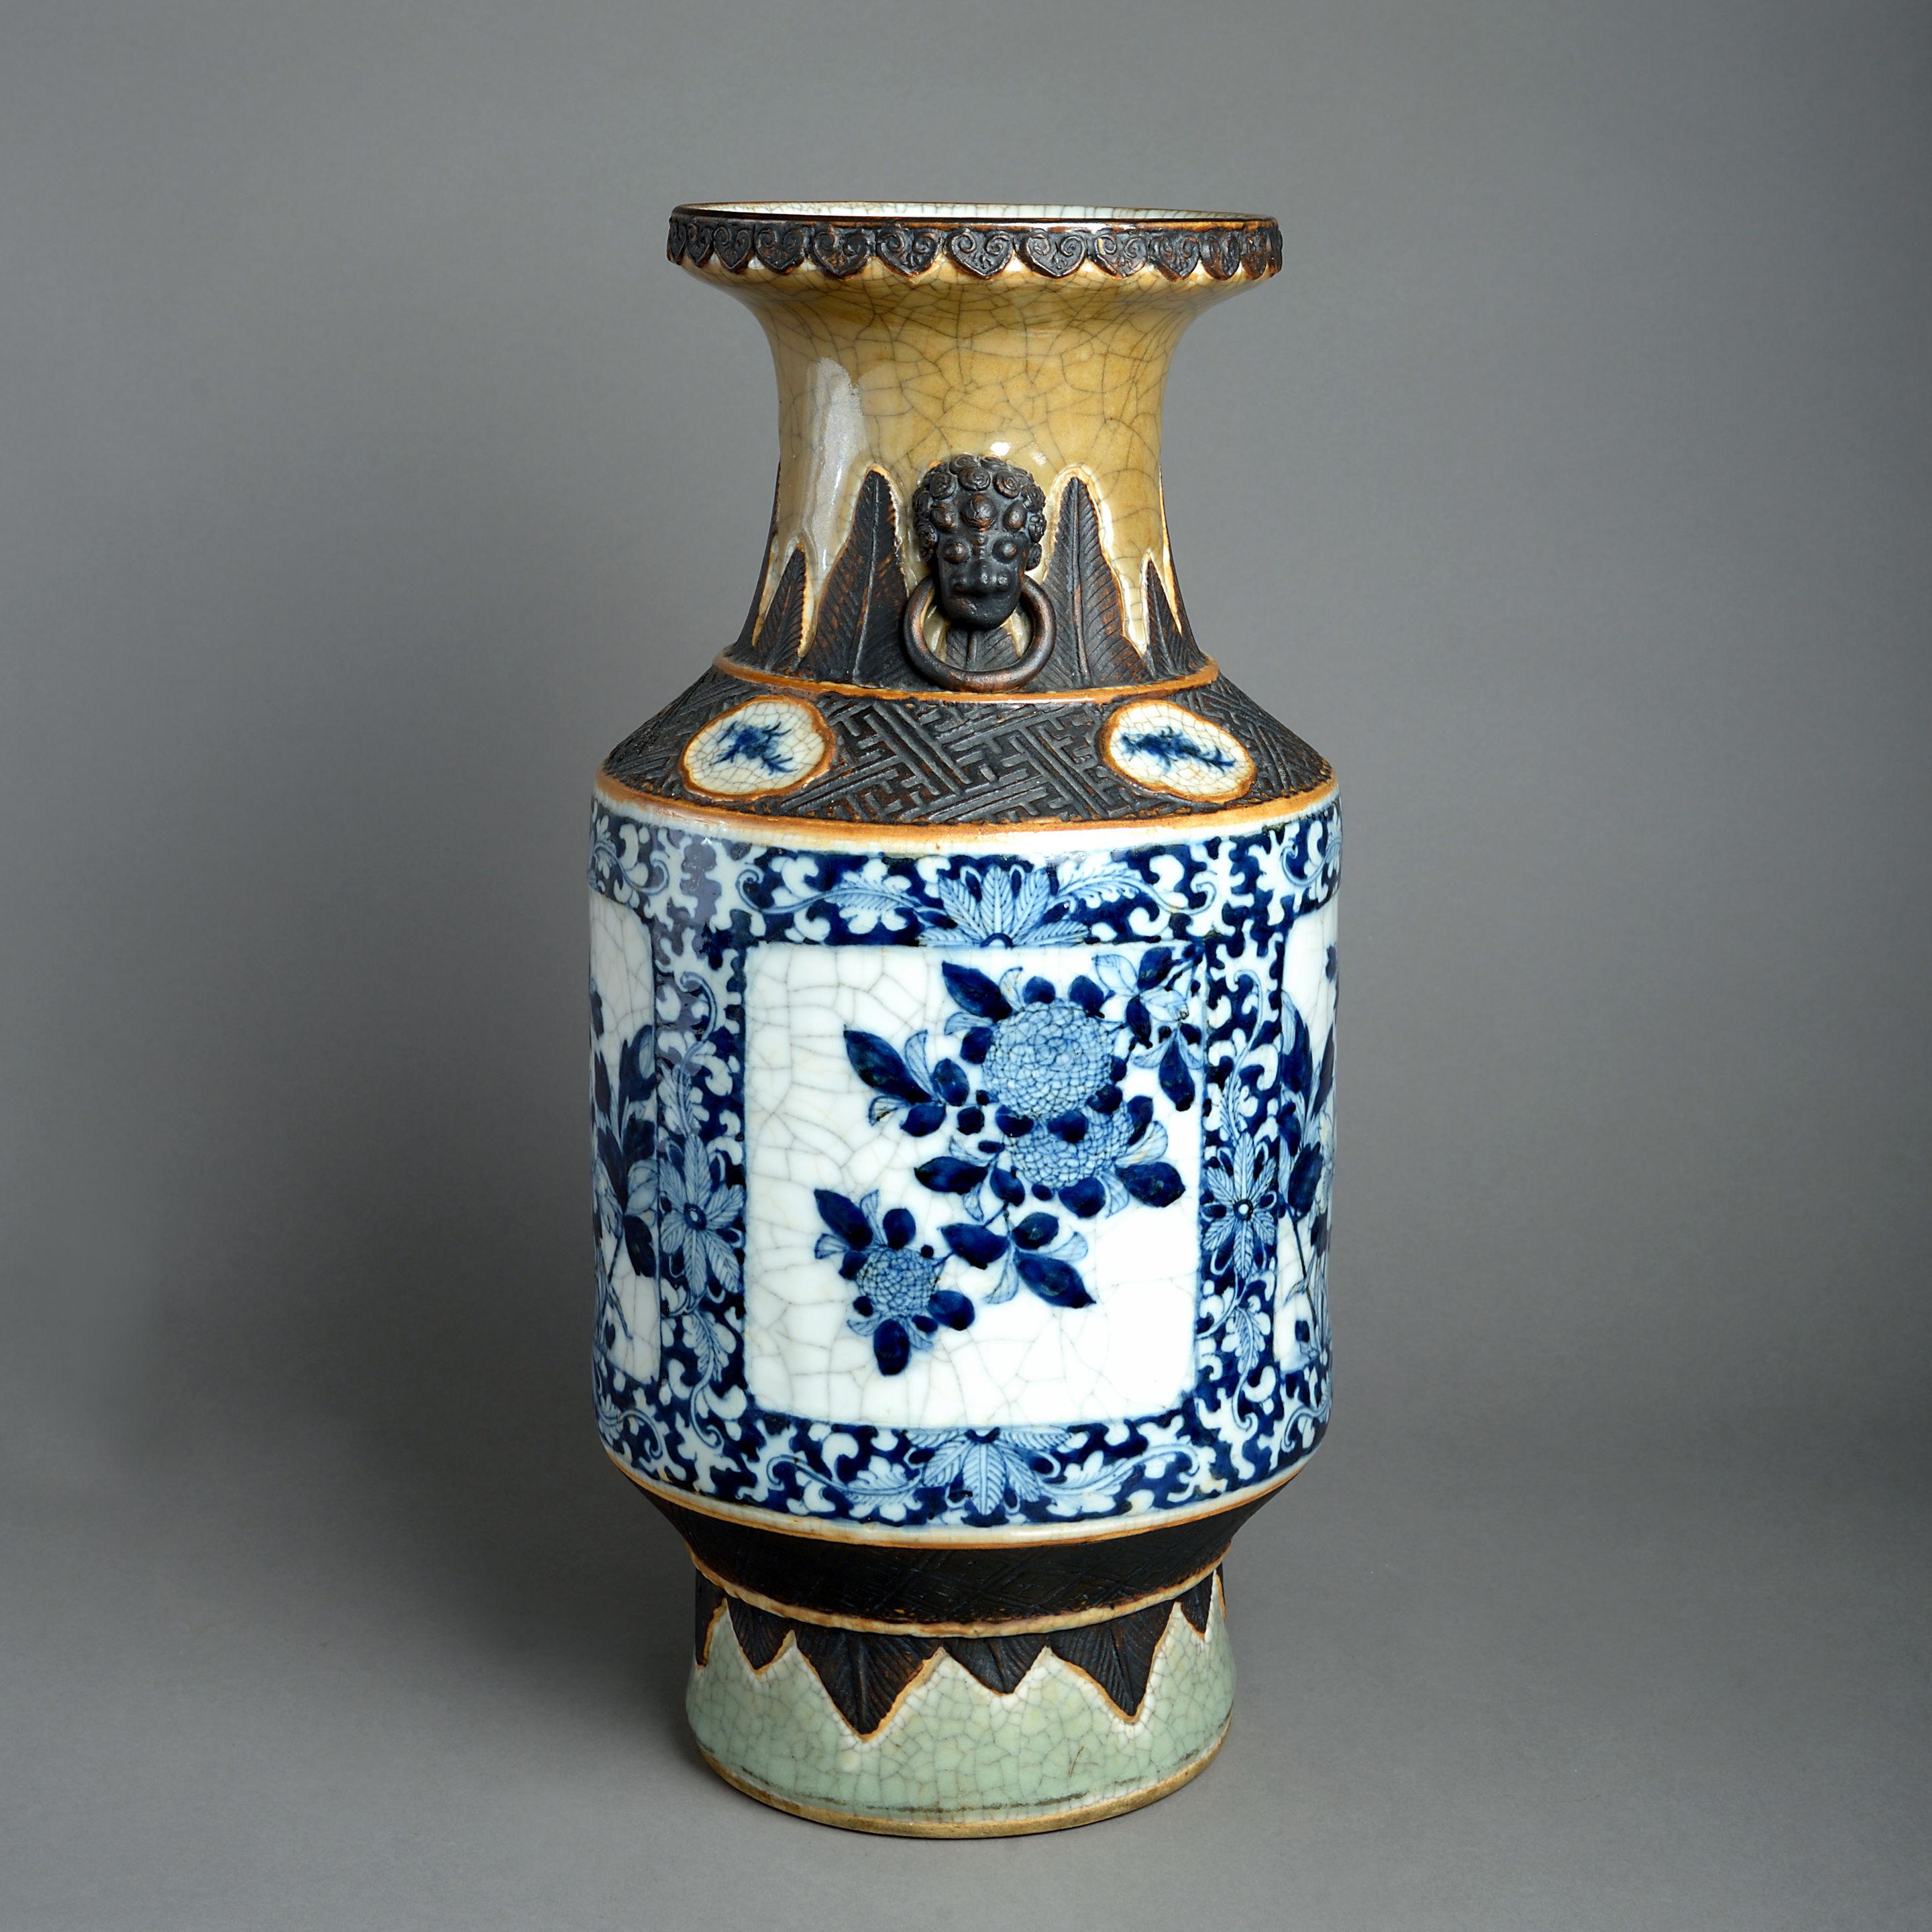 A 19th century crackleware porcelain vase of good scale, decorated with caramel, celadon, blue and white glazes throughout. 

Qing Dynasty
    